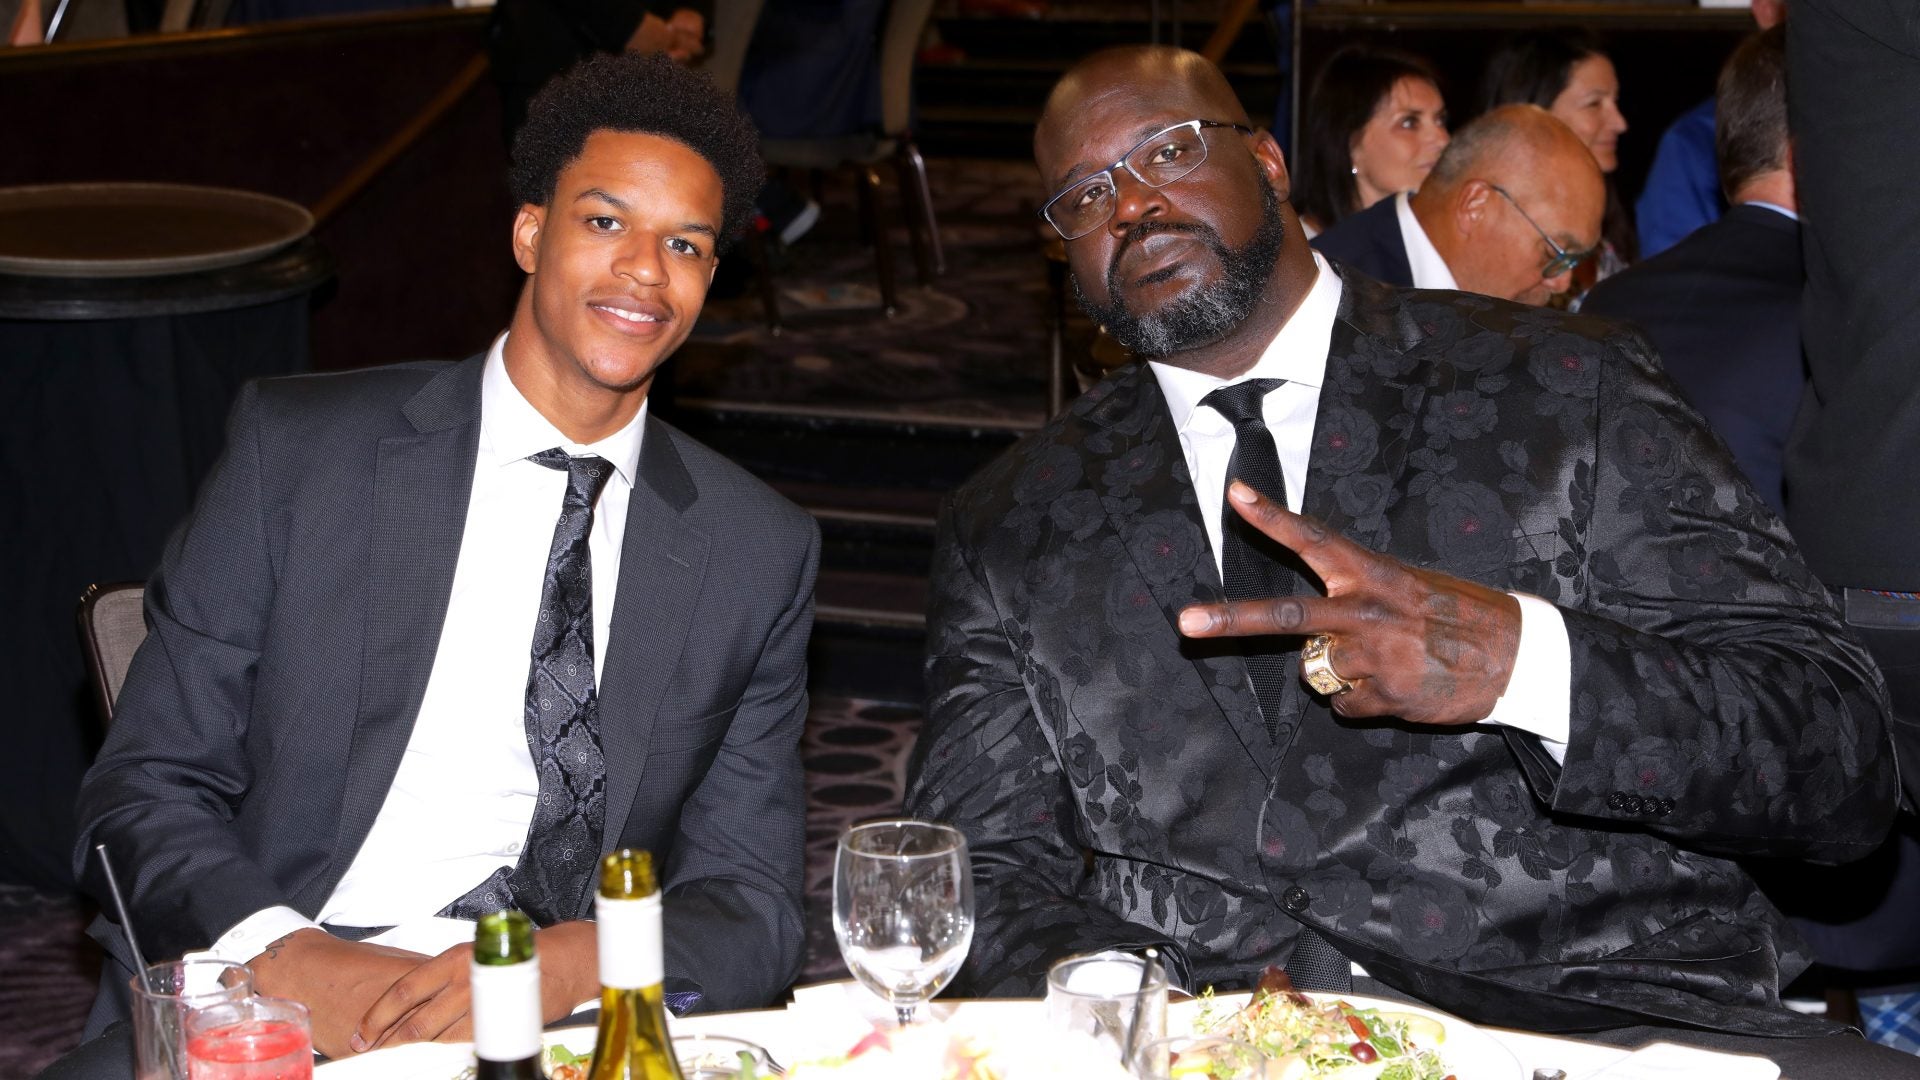 No One Knew Shareef O'Neal's Dad Was Shaq Growing Up: 'We Just Kind Of Hid It So People Didn't Treat Us Differently'